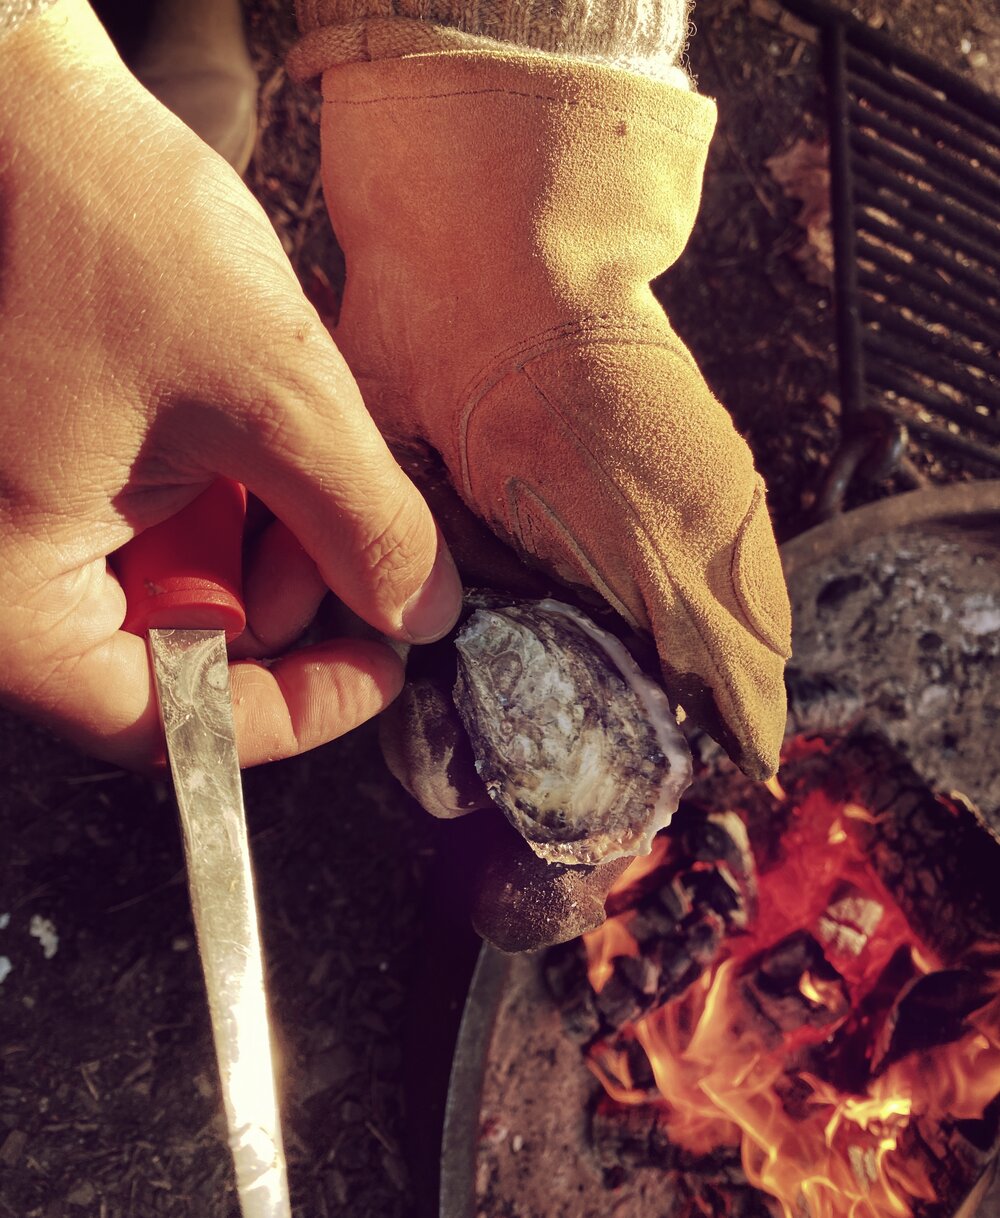 Shucking oysters by the campfire Taylor Shellfish